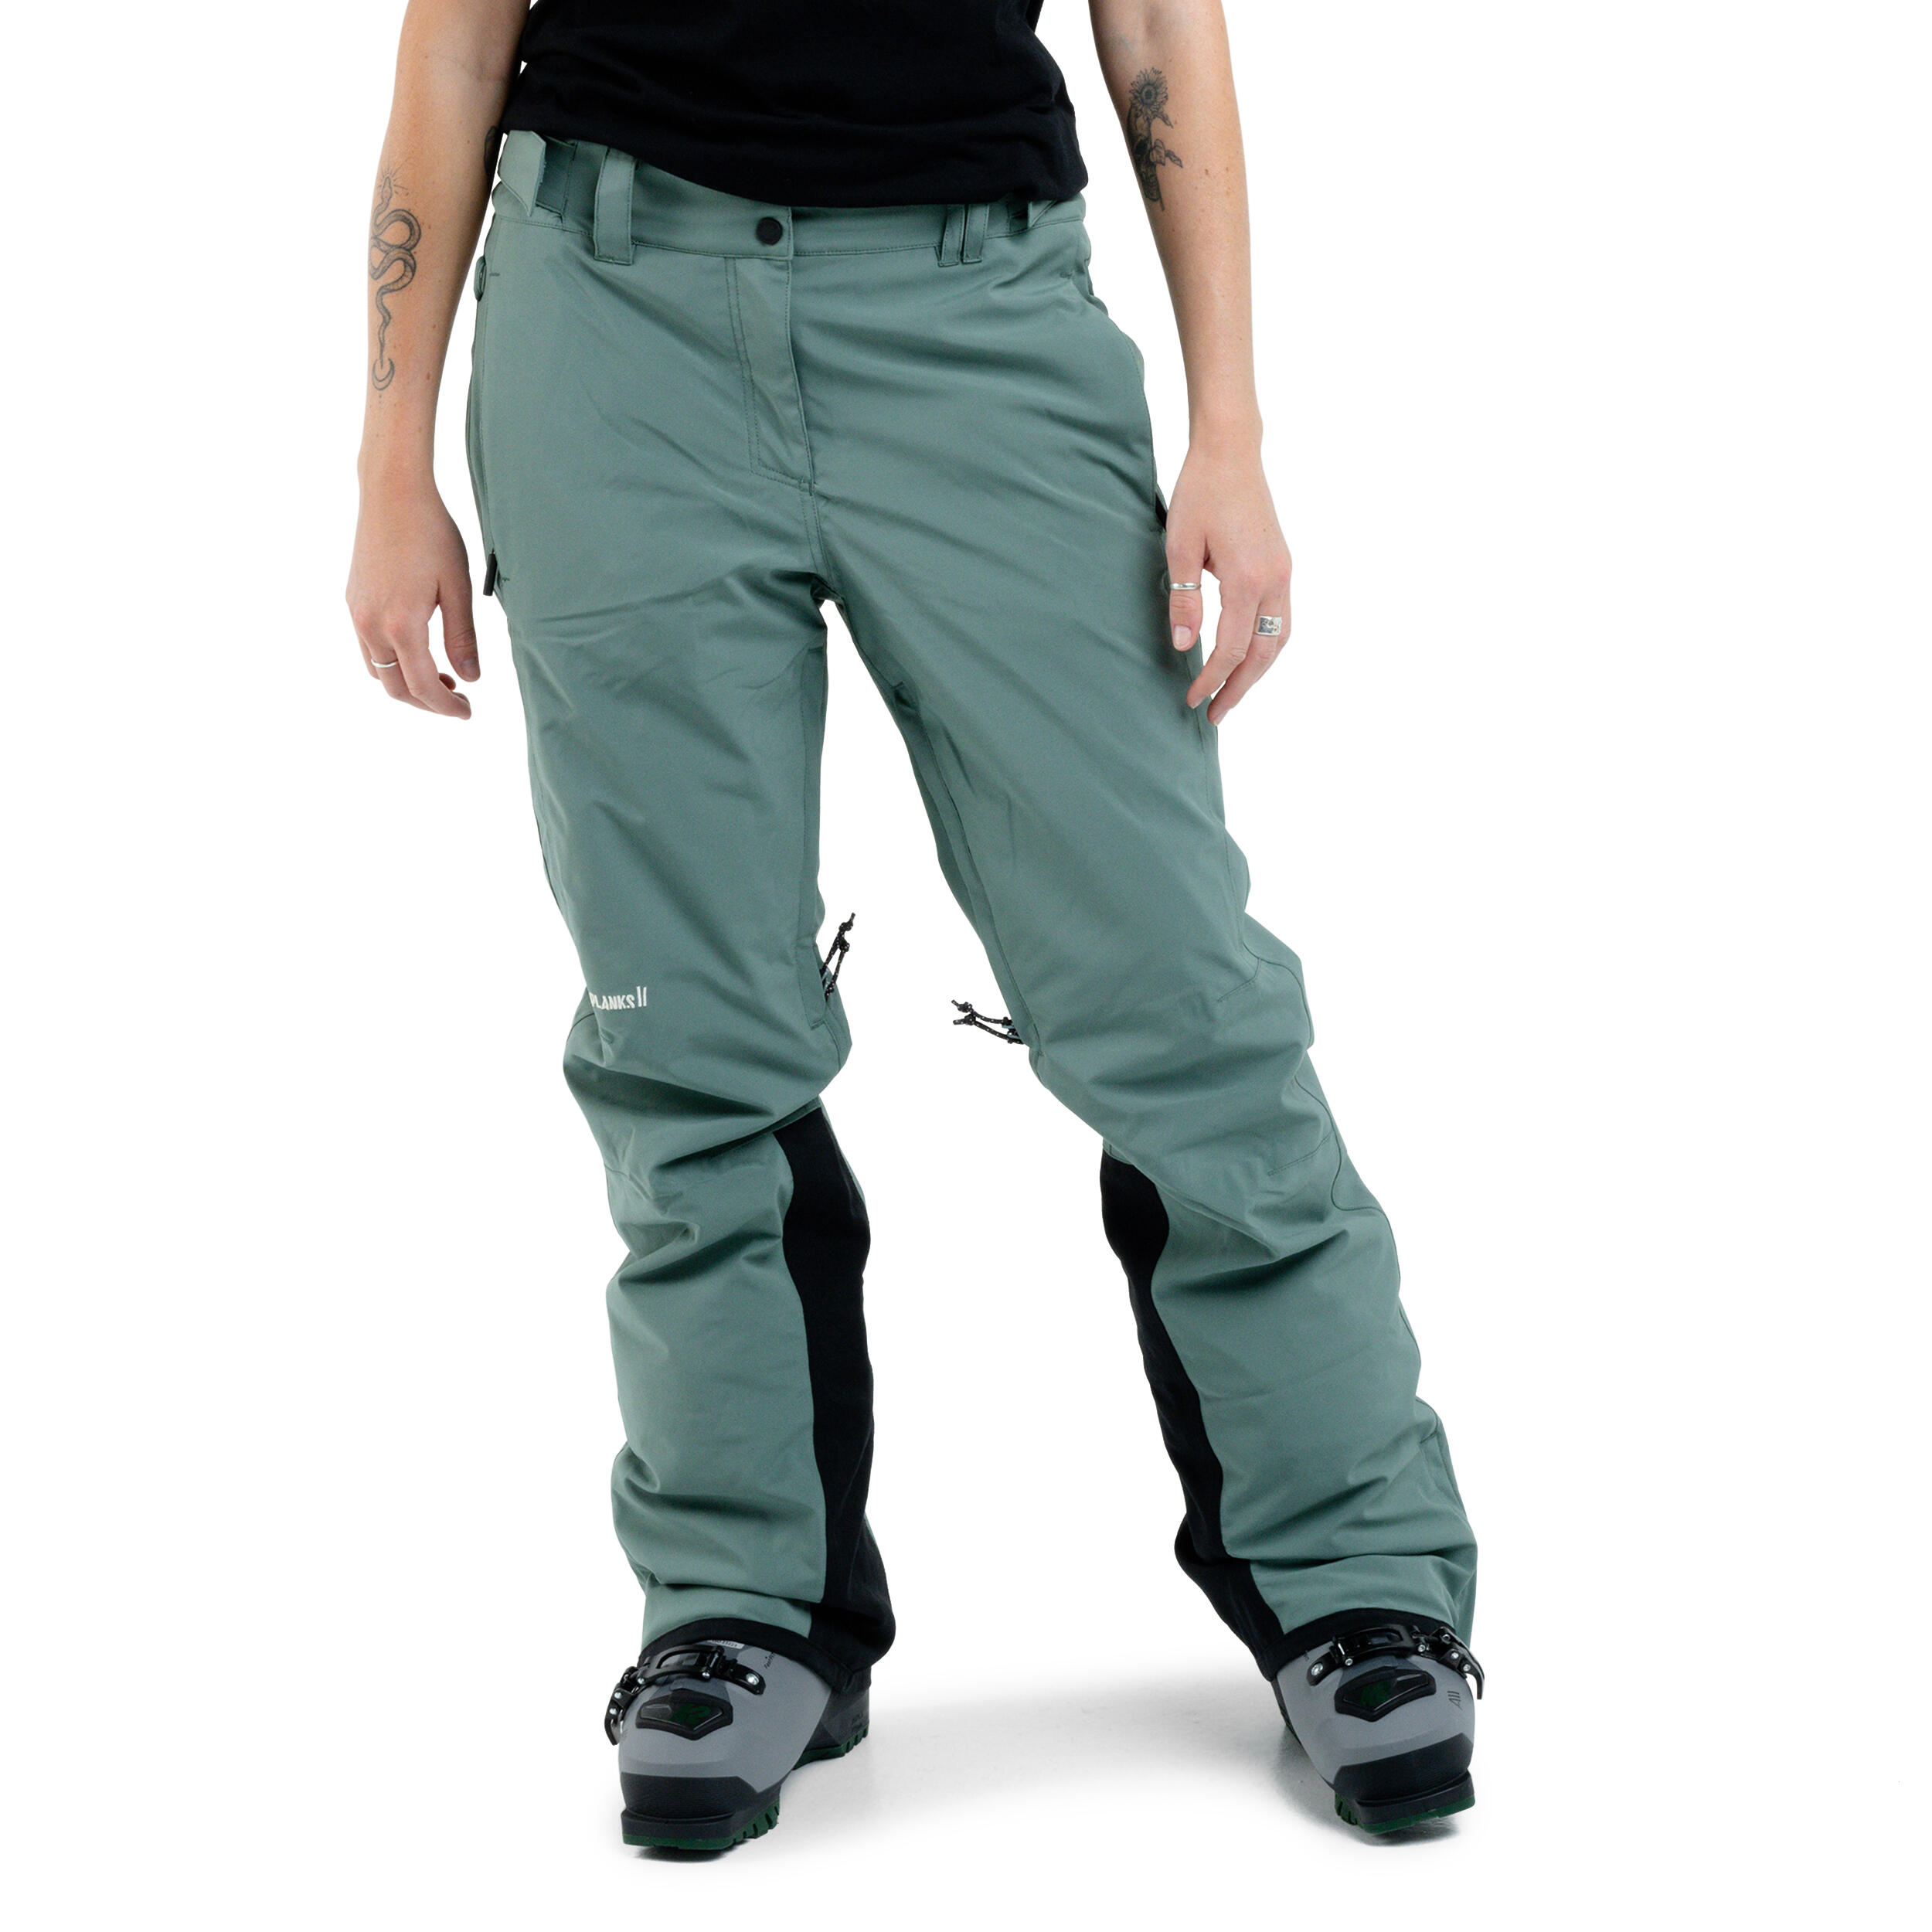 PLANKS Planks All-Time Women's Insulated Pants in Sage Green - Ladies Sports Trousers